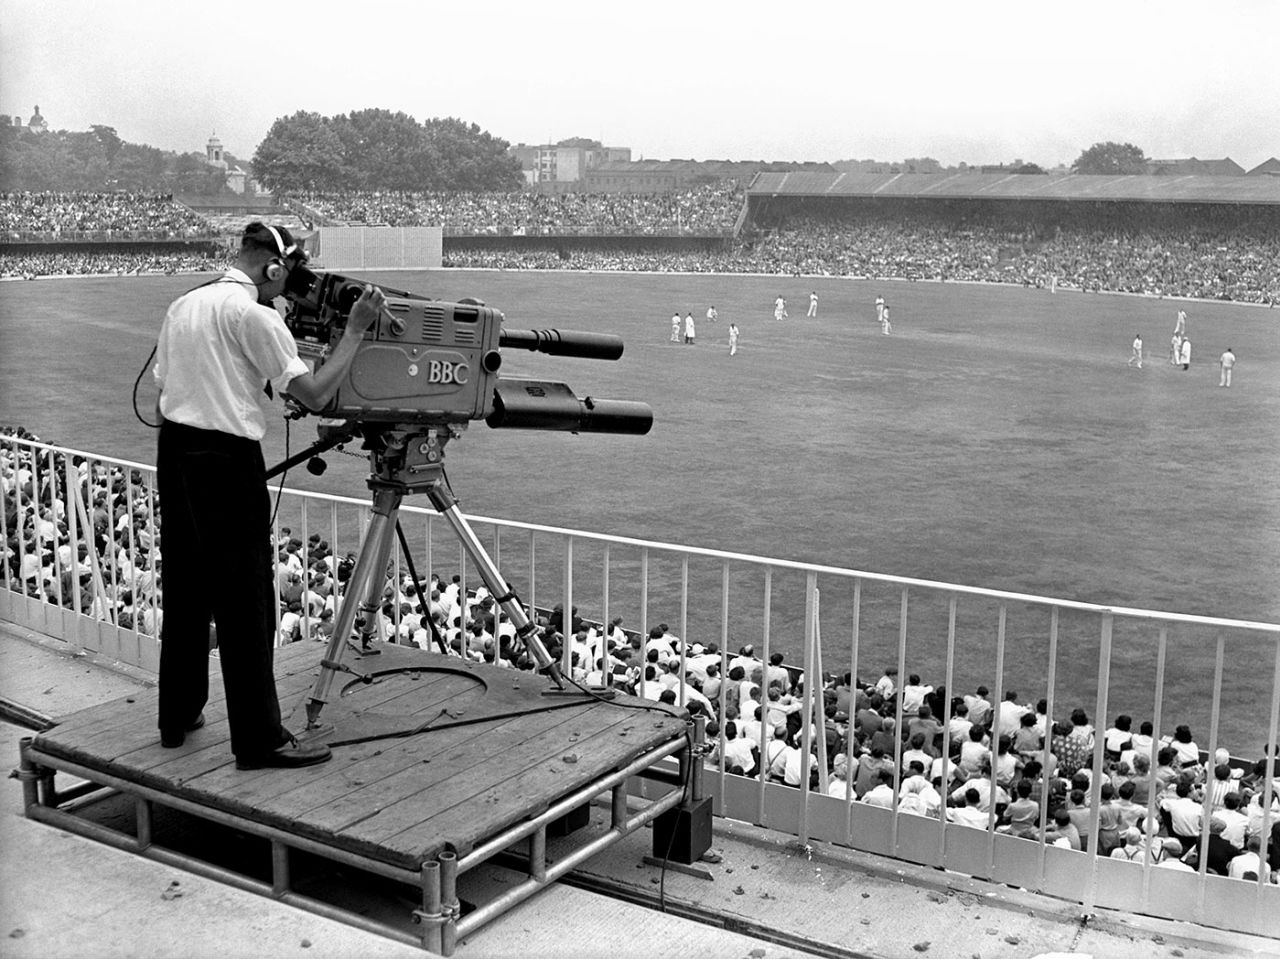 A BBC cameraman covers the Test, England v West Indies, 2nd Test Lord's, 3rd day, June 22, 1957